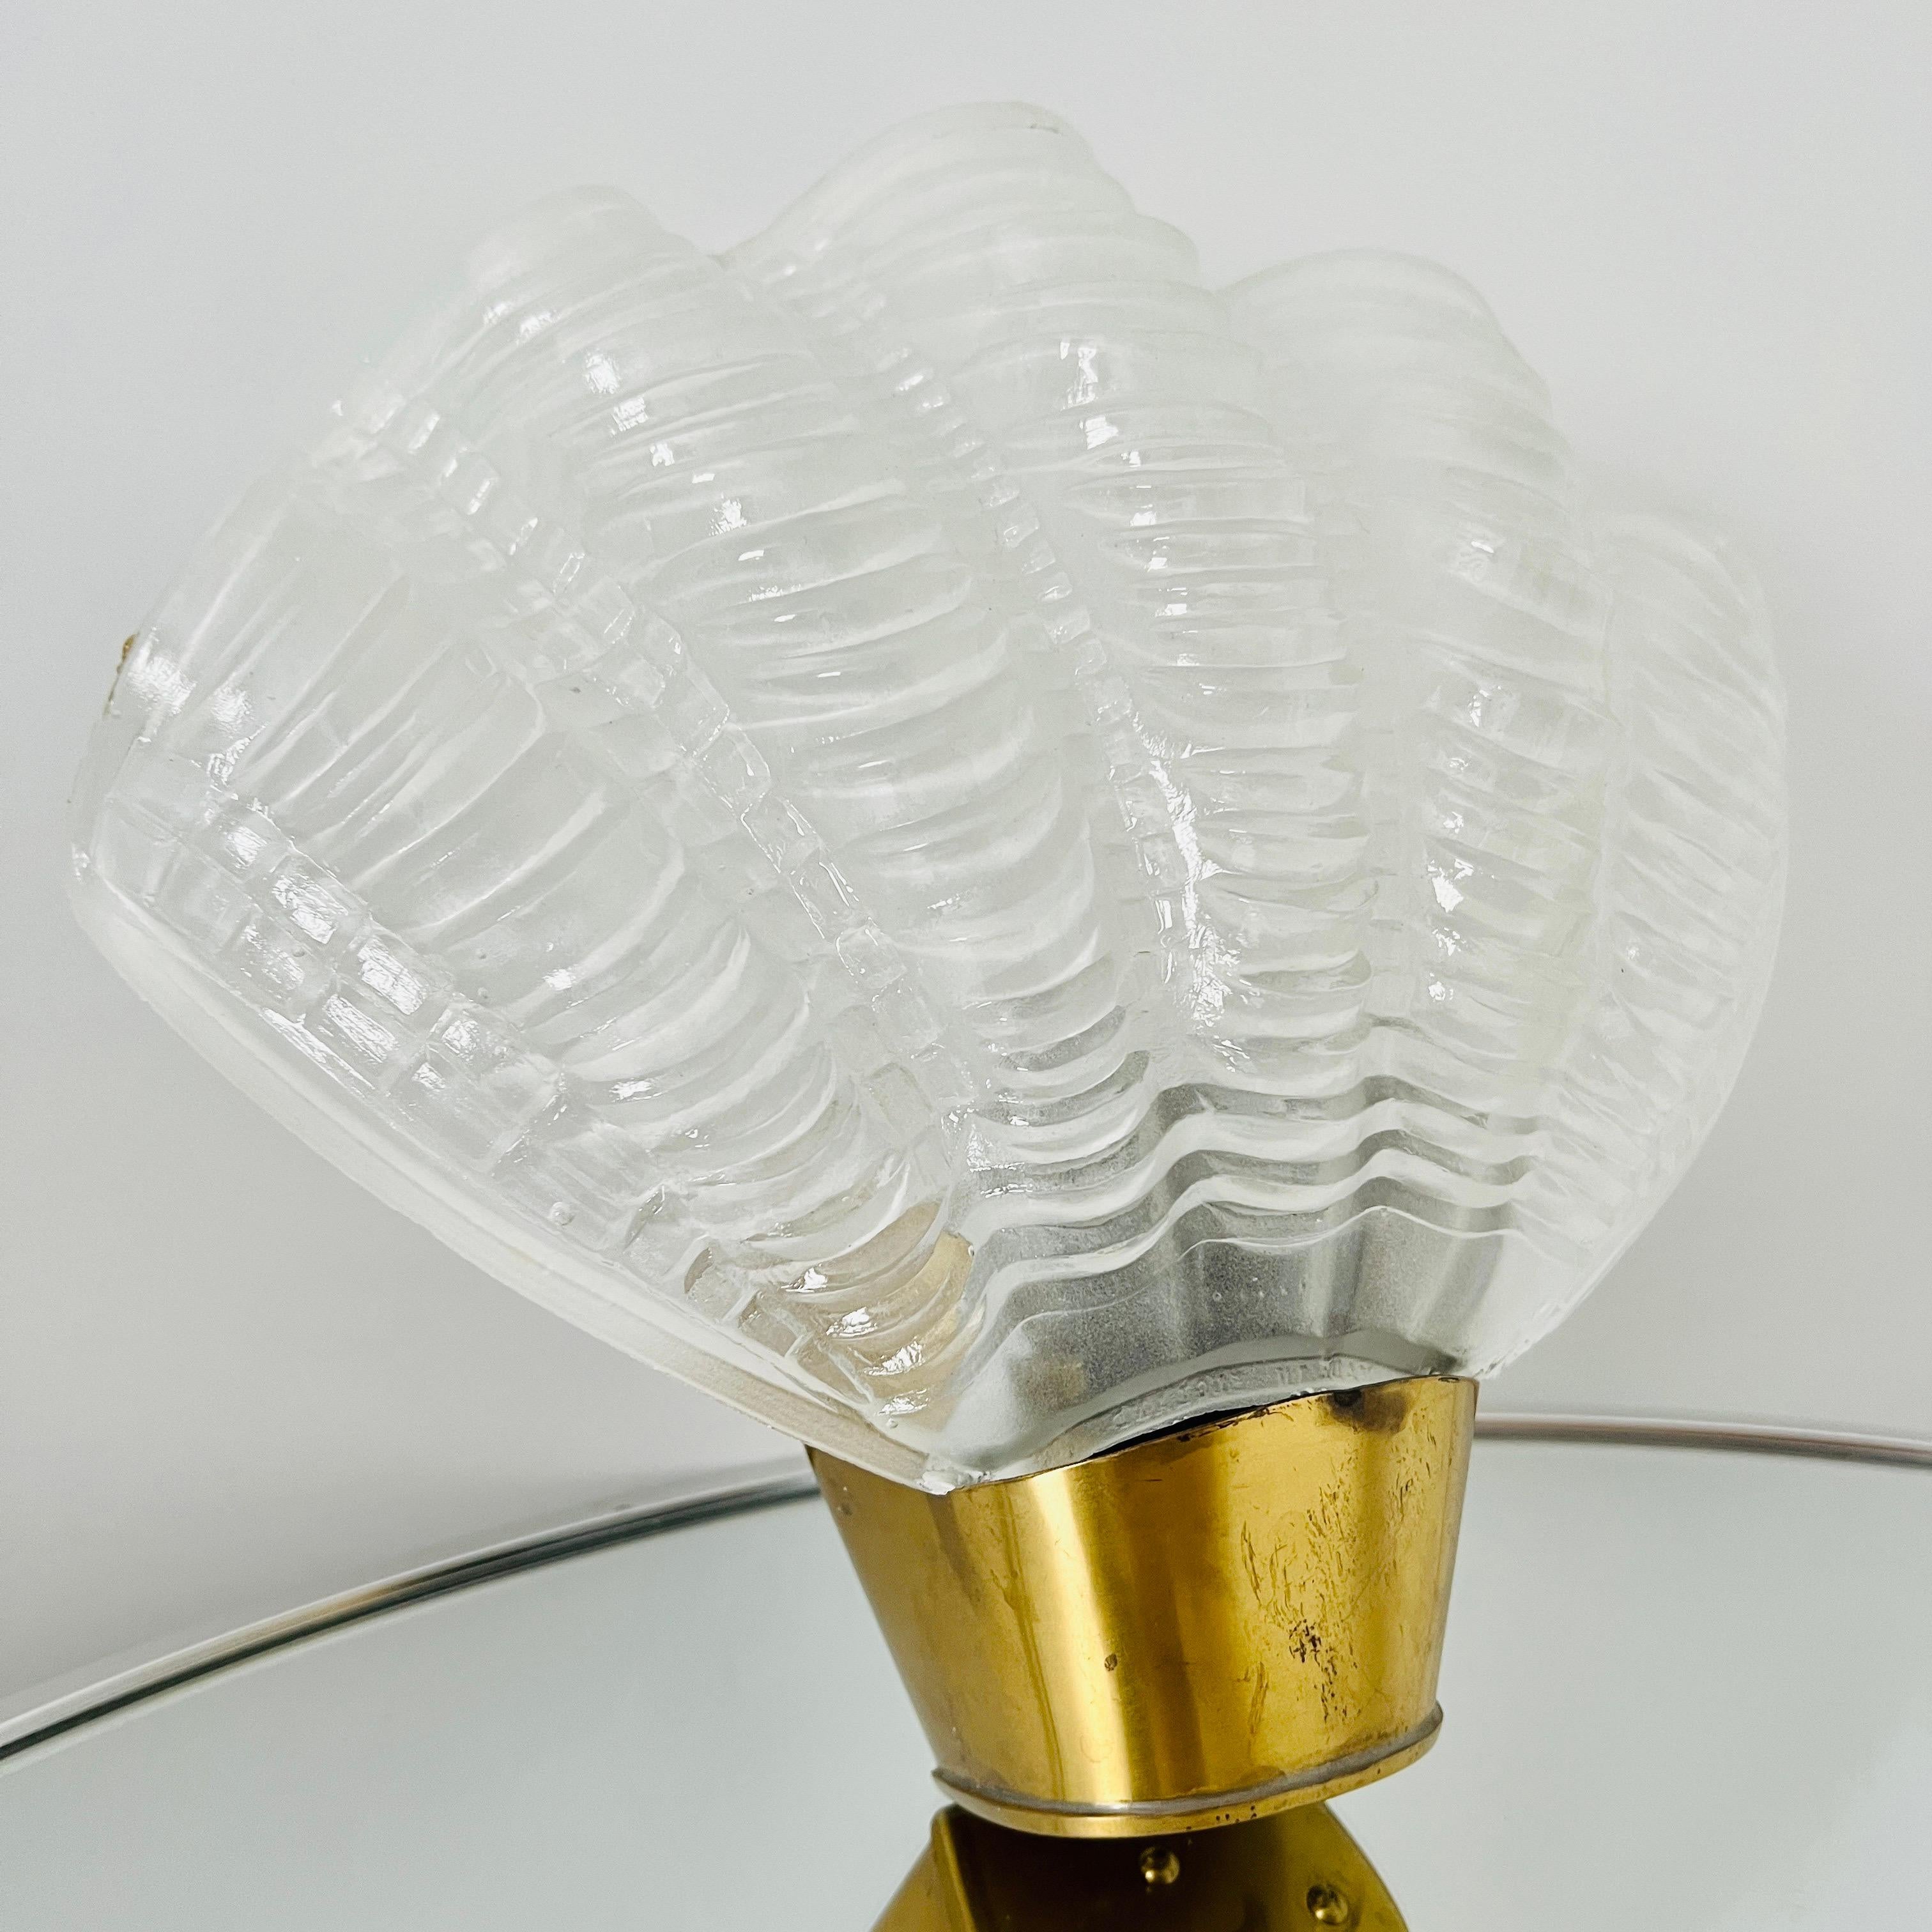 English Art Deco Sconce with Elegant Shell Design, England, c. 1930's For Sale